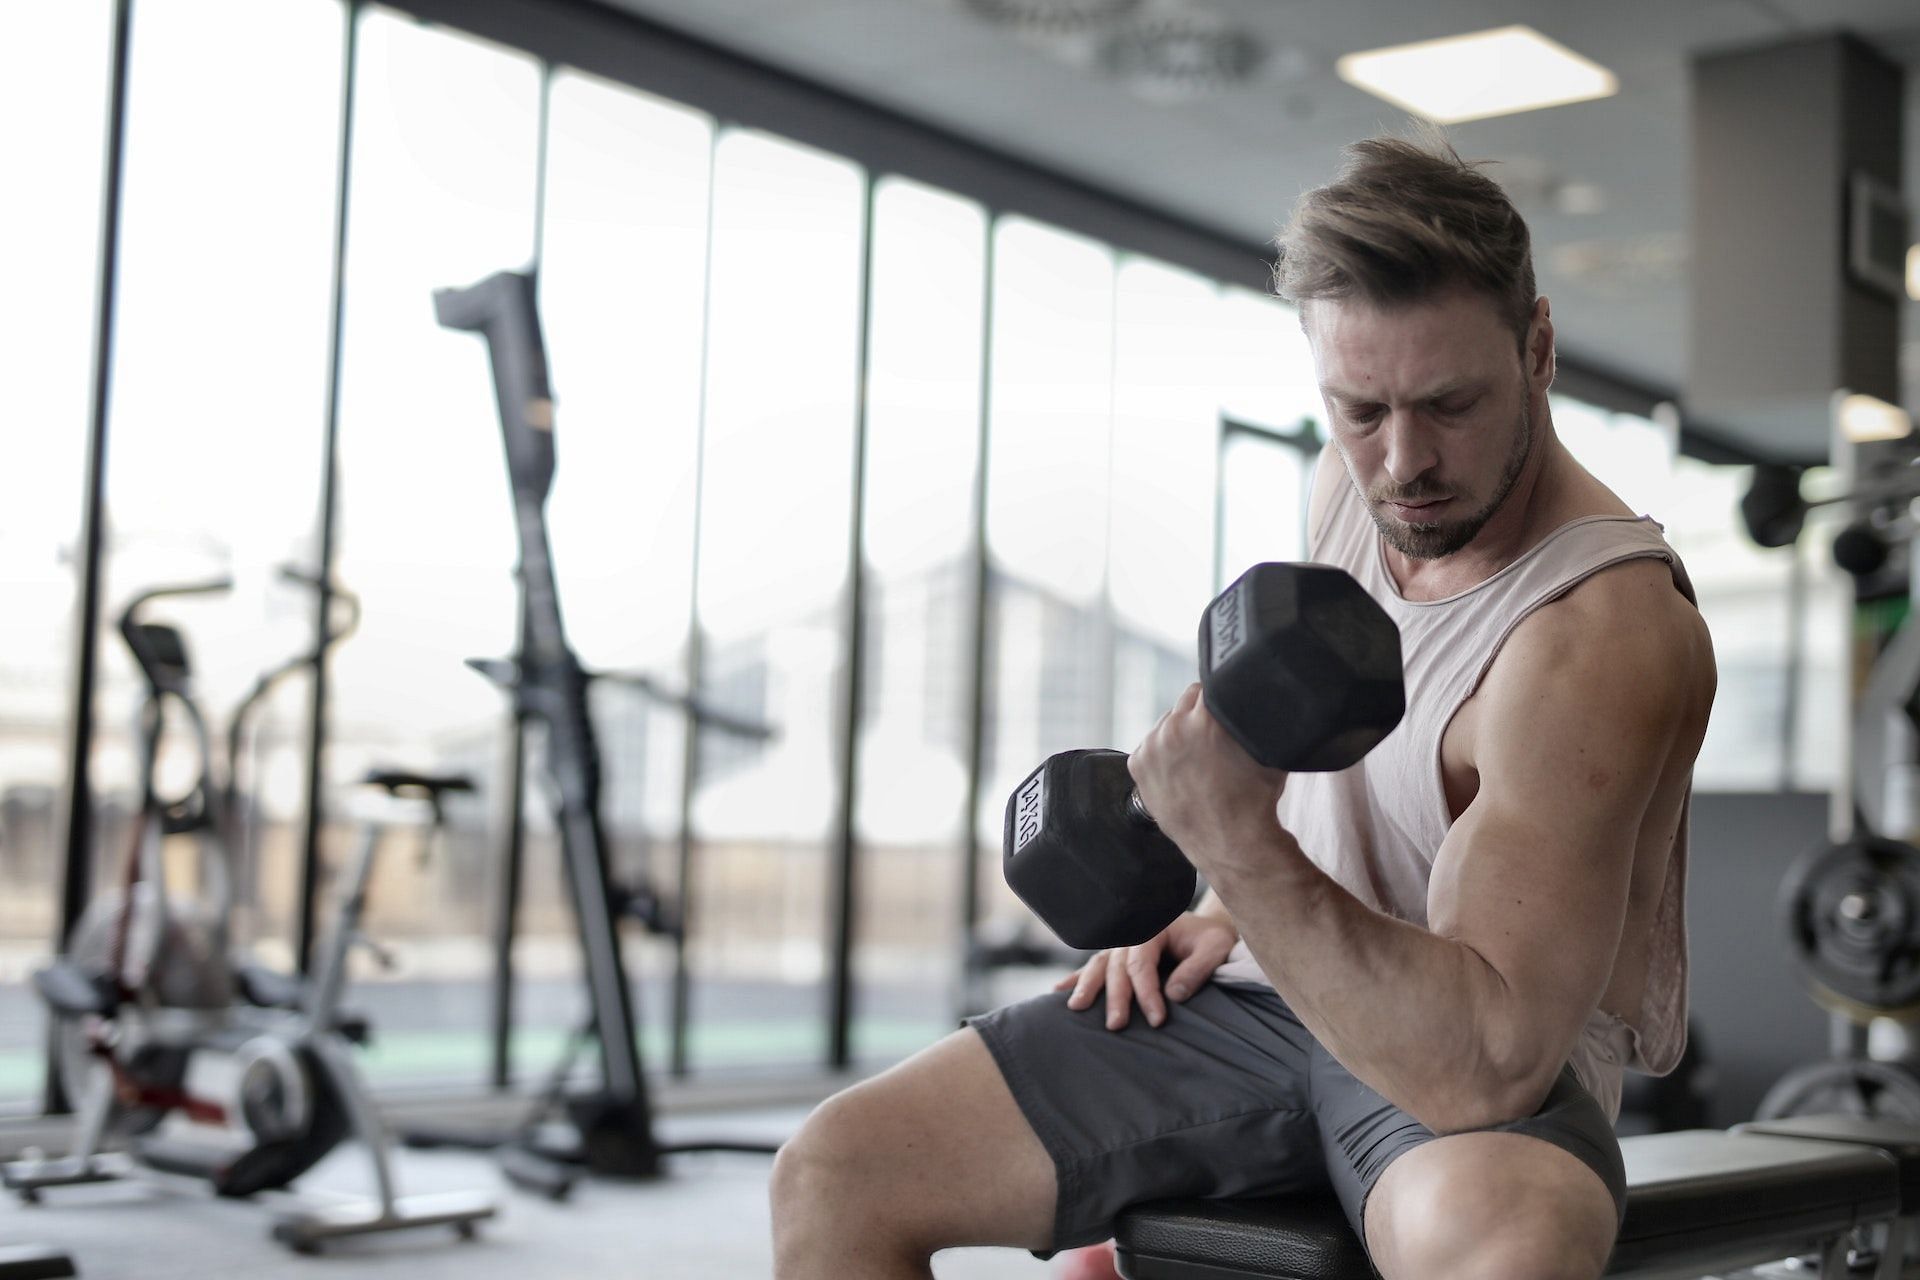 Dumbbells make an incredible tool to build your arms. (Photo via Pexels/Andrea Piacquadio)